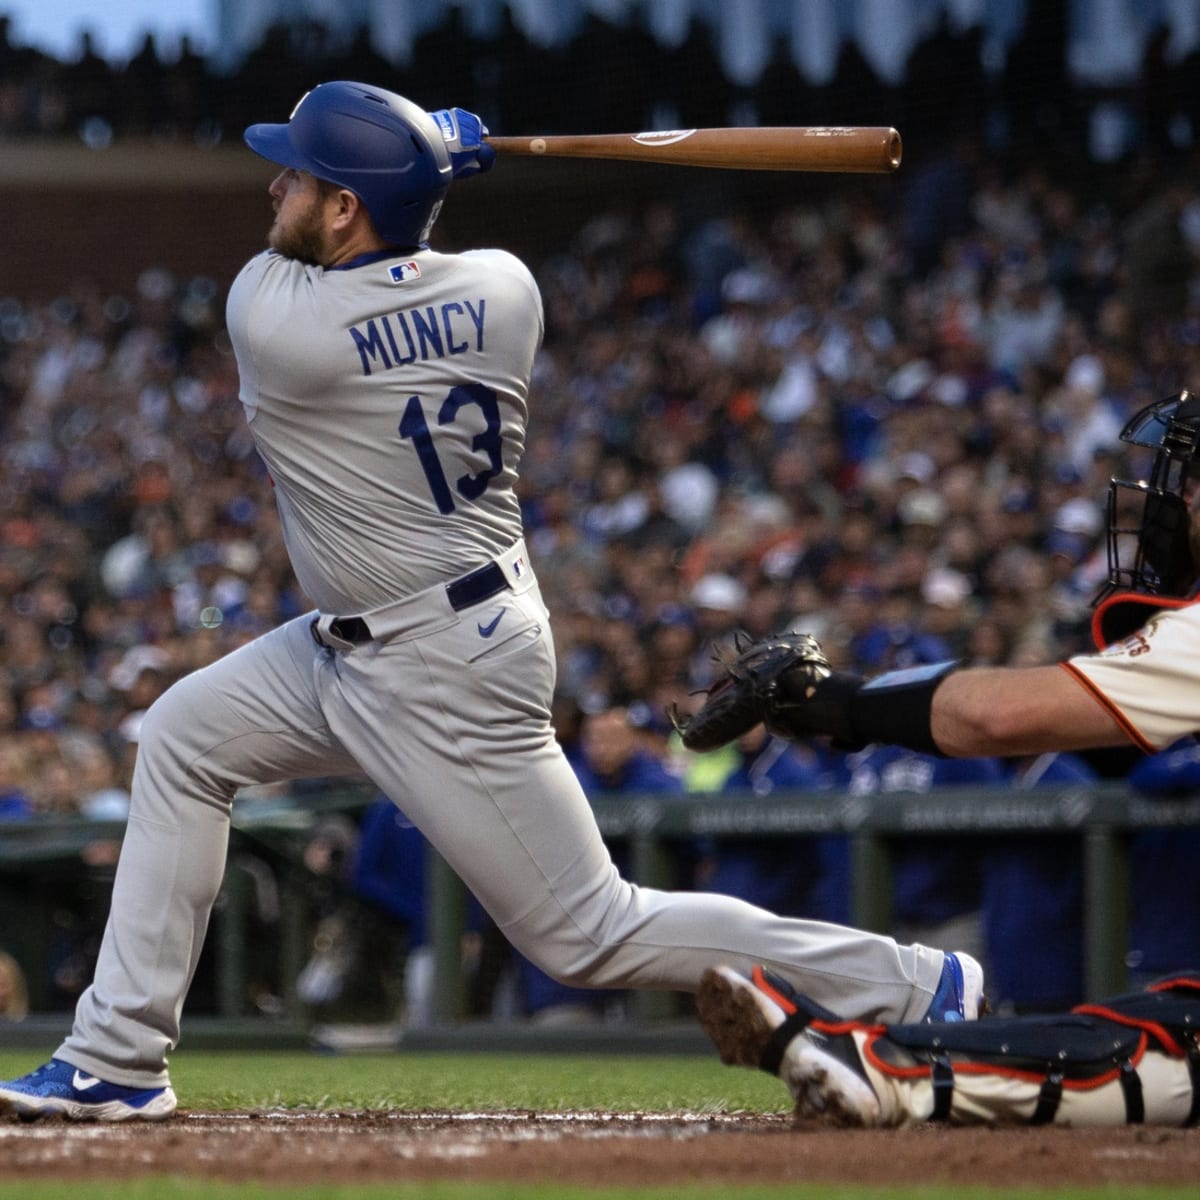 Online Trolls Have Fun at Giants Expense Following Career Game by Dodgers Max Muncy